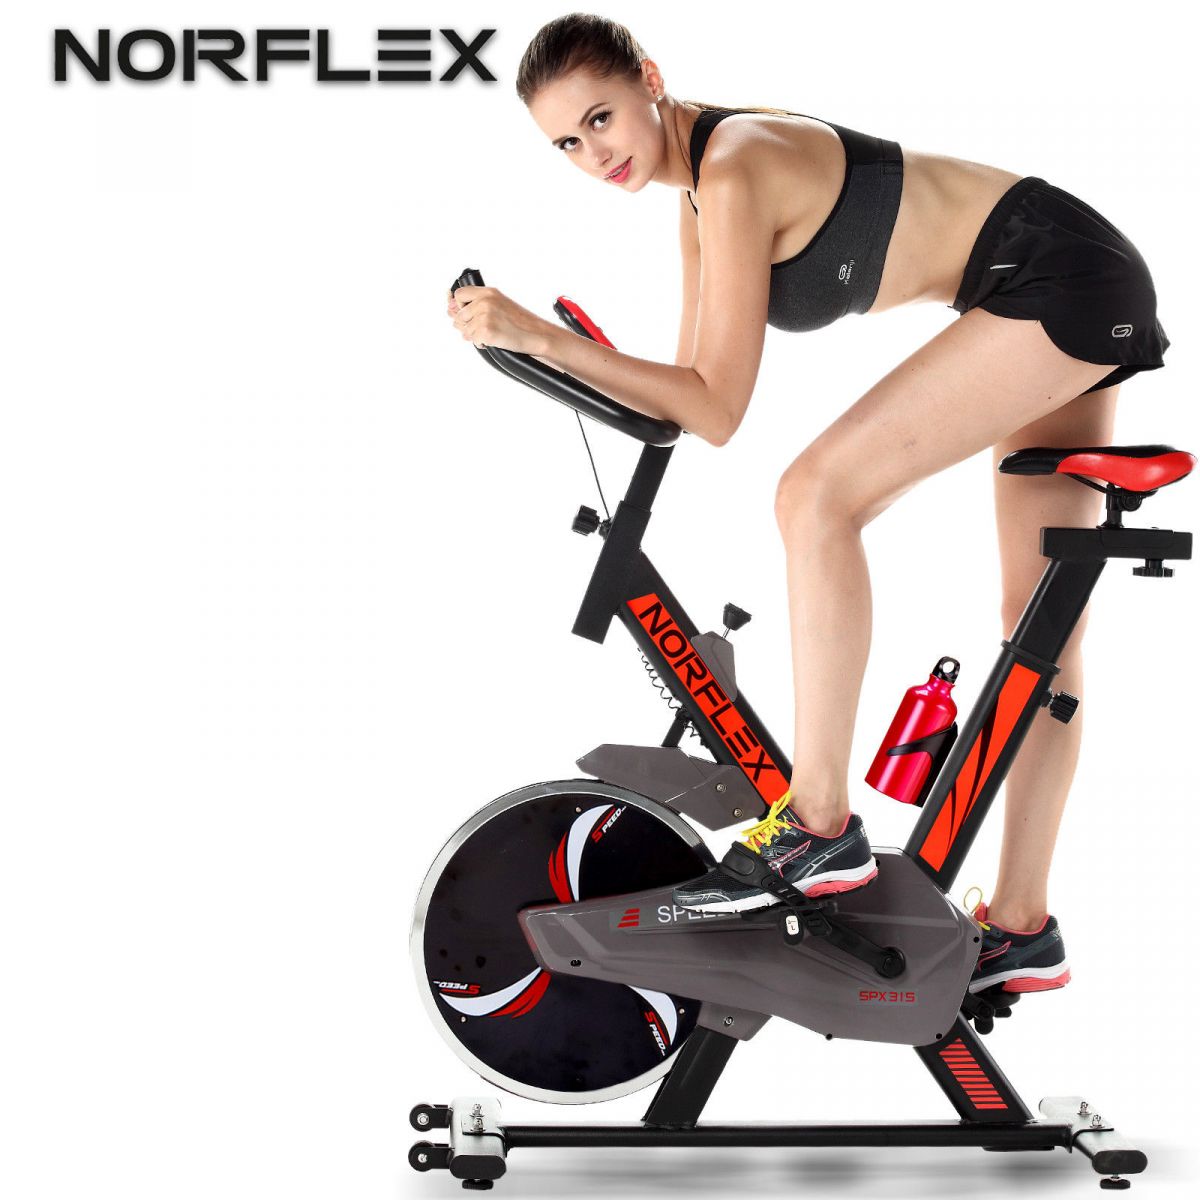 NORFLEX Gym Exercise Bike - 120 Kg Max Weight